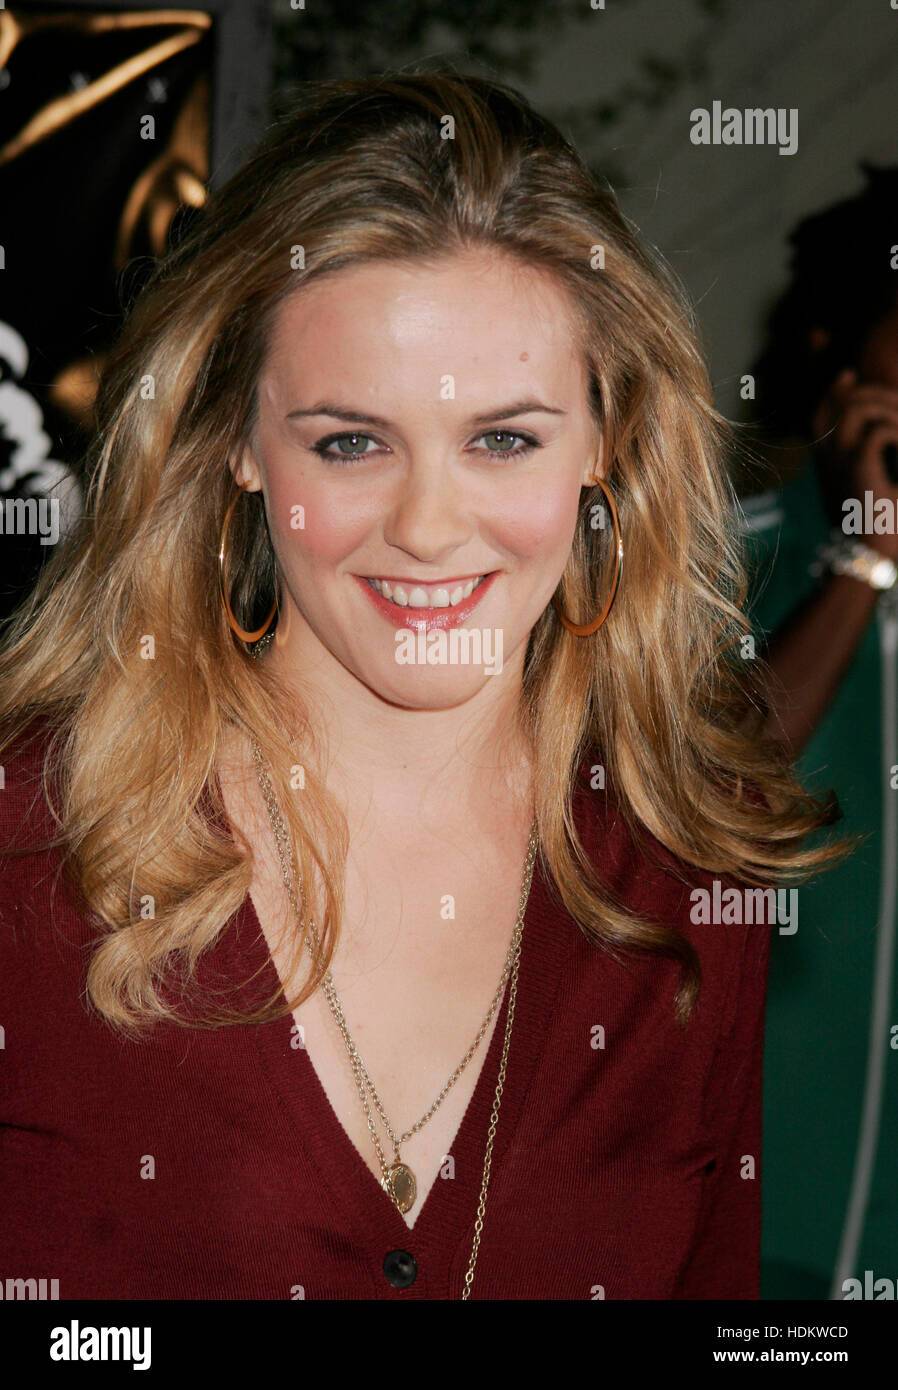 Actress Alicia Silverstone  poses for photographers at the premiere of the new  film 'Ray' about the life and music of the late singer Ray Charles in Los Angeles,  October 19, 2004.  Photo by Francis Specker Stock Photo